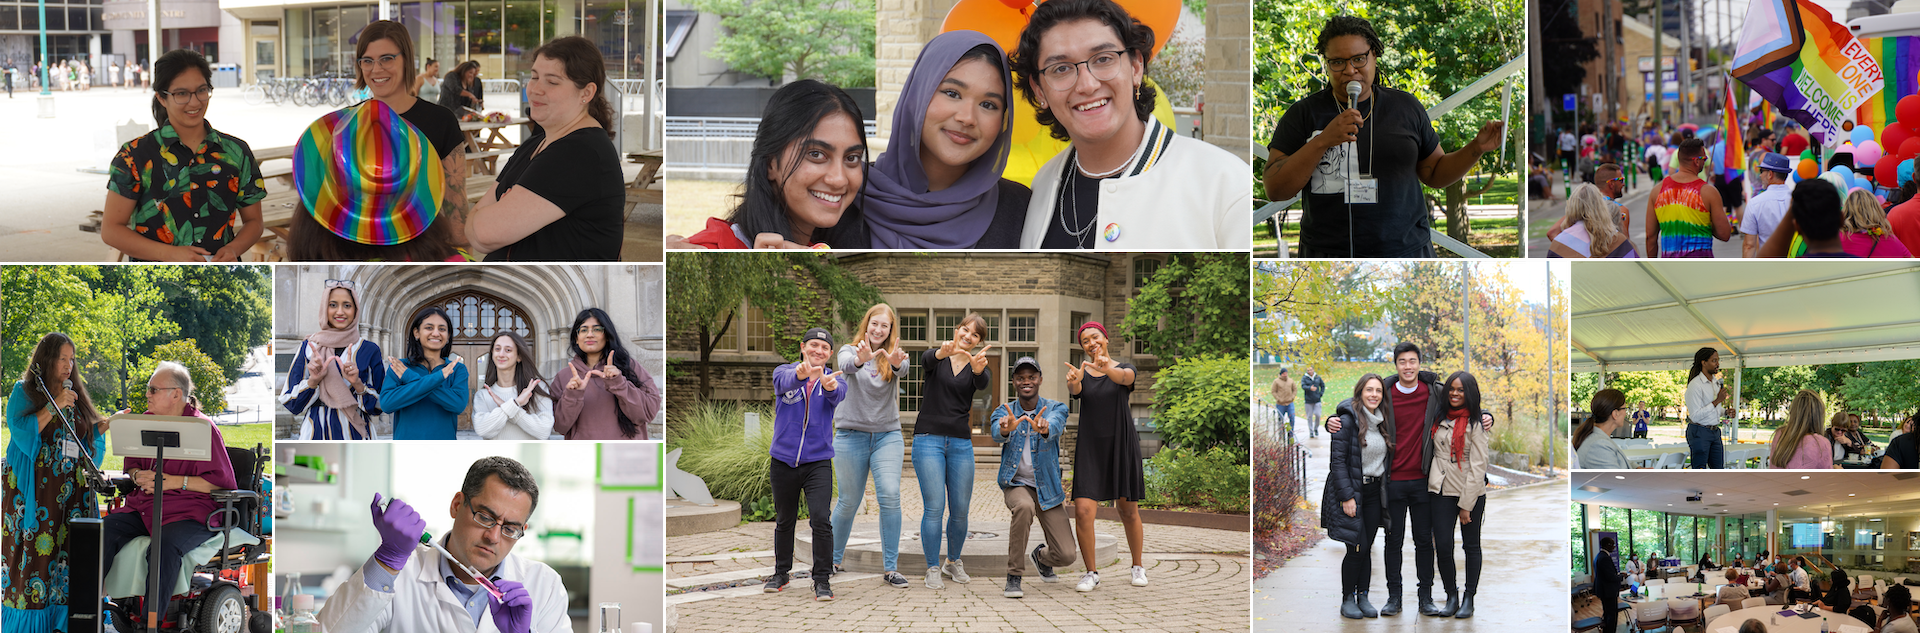 A collage of diverse students, staff and faculty on campus at Western University interacting with each other